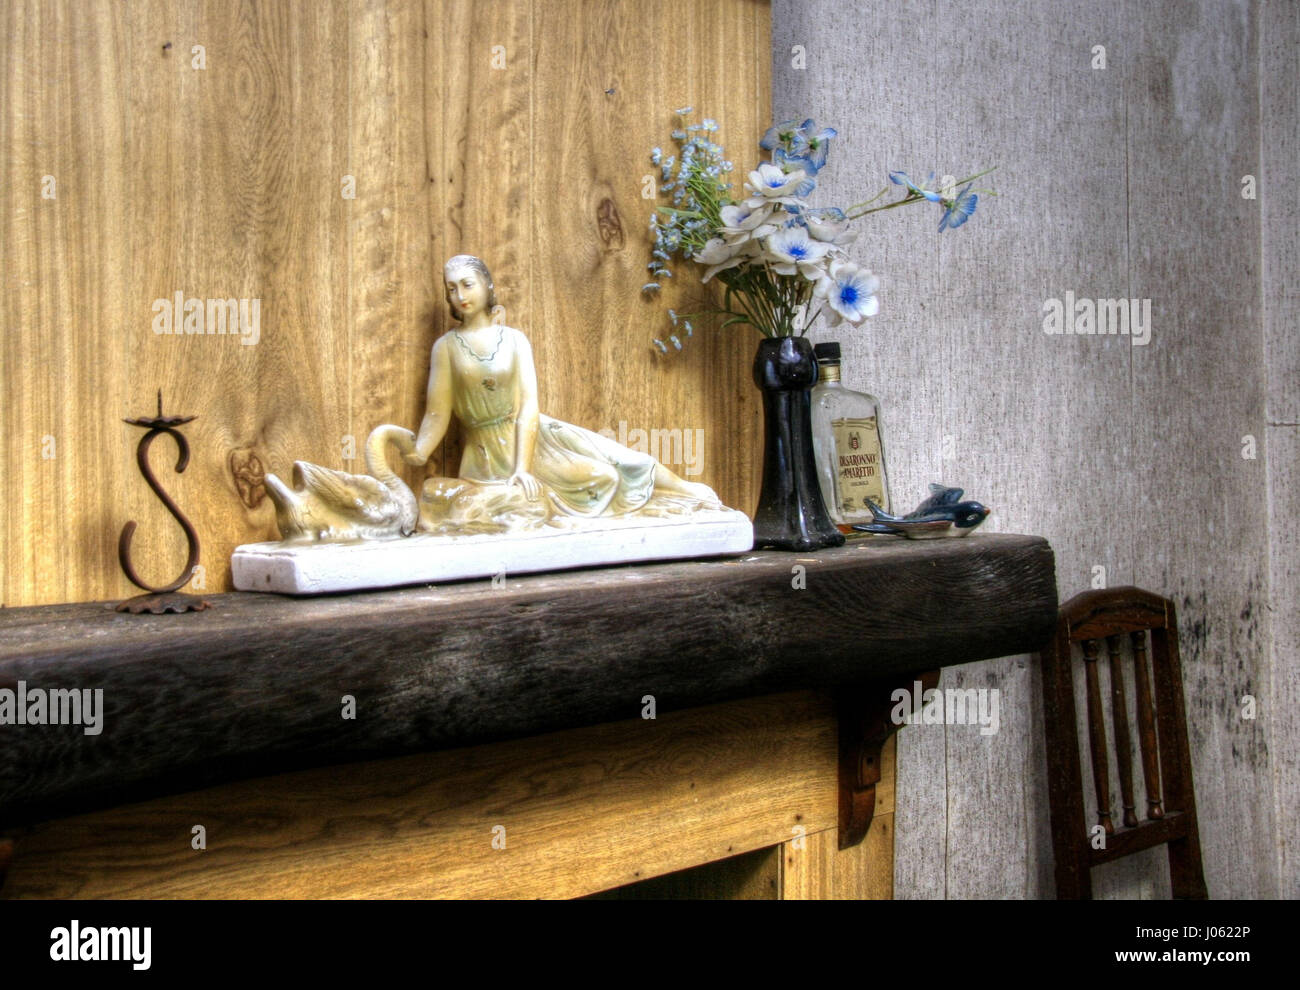 BELGIUM: FLASHBACK photos show this home where time has stood still since the 1960’s when it was mysteriously abandoned by the family who owned it. The decadent images show a decaying house with retro-wallpaper and other décor, filled with family possessions, including family portraits and a child’s yellow wellington boot. The home appears to have been abandoned in a hurry as a casserole dish and flask have been left on the dining table. Urban explorer Jane Veltmann (31) from Germany captured the lost home in Belgium using a Canon EOS 20D. Jane Veltmann / mediadrumworld.com Stock Photo